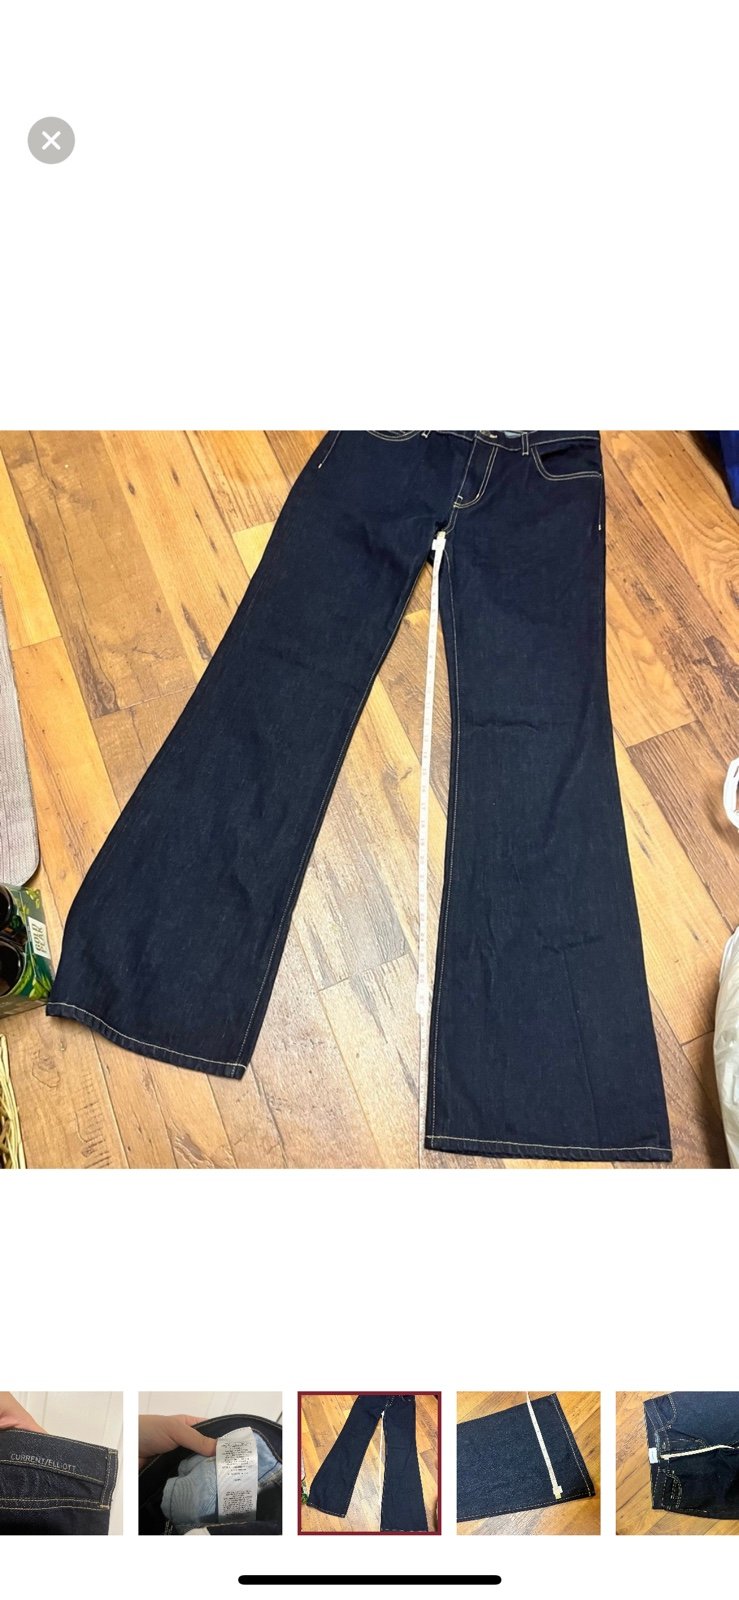 Comfortable Current/Elliott The Wray Wide Leg Jeans Hearst Wash Size 28 Q h5RIrapVD Factory Price